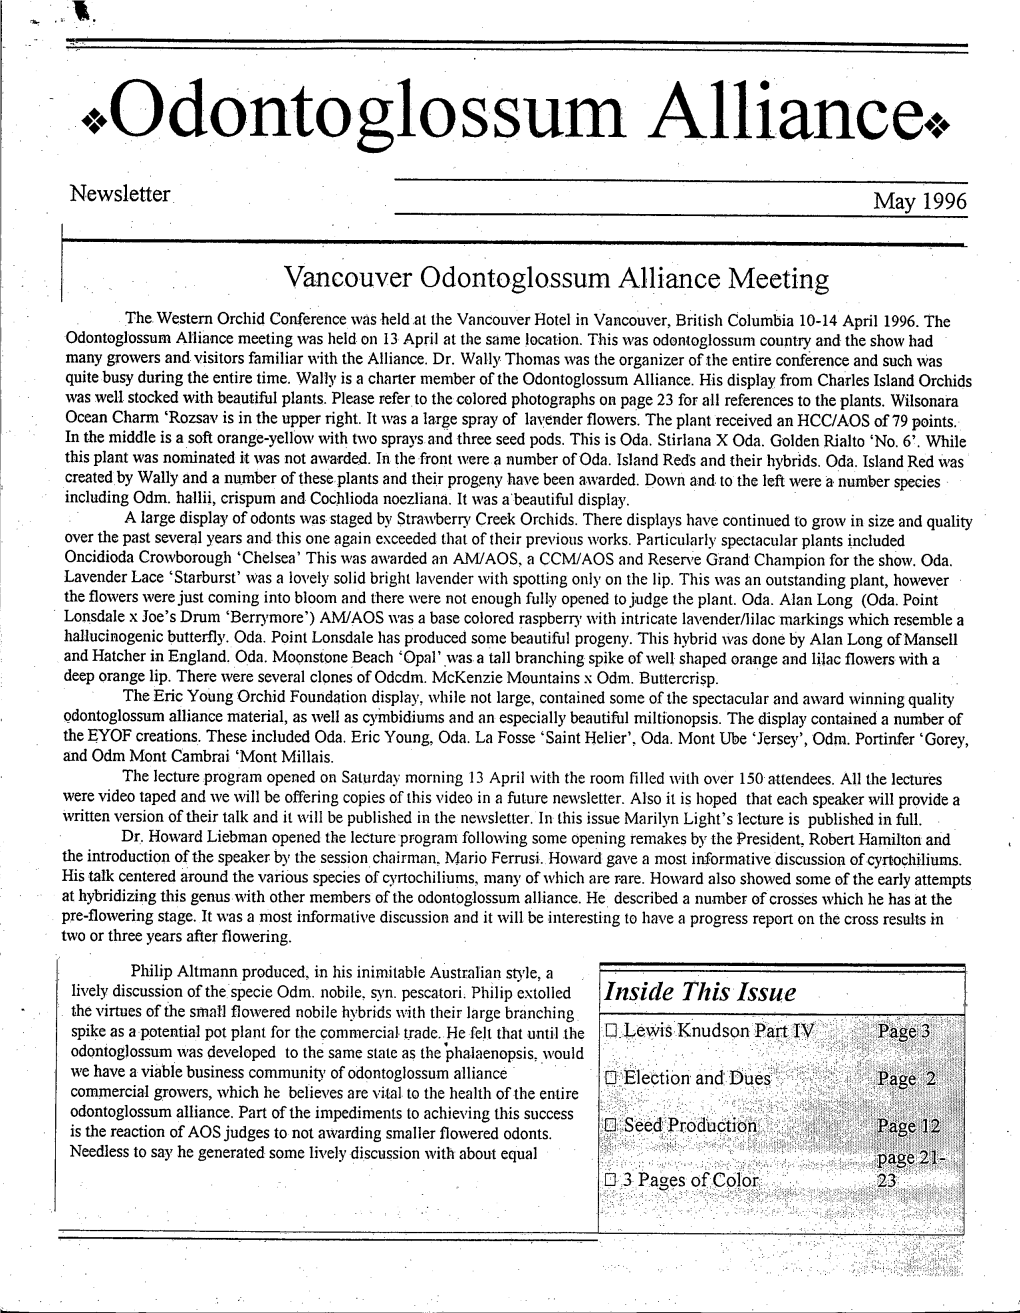 May 1996 Newsletter